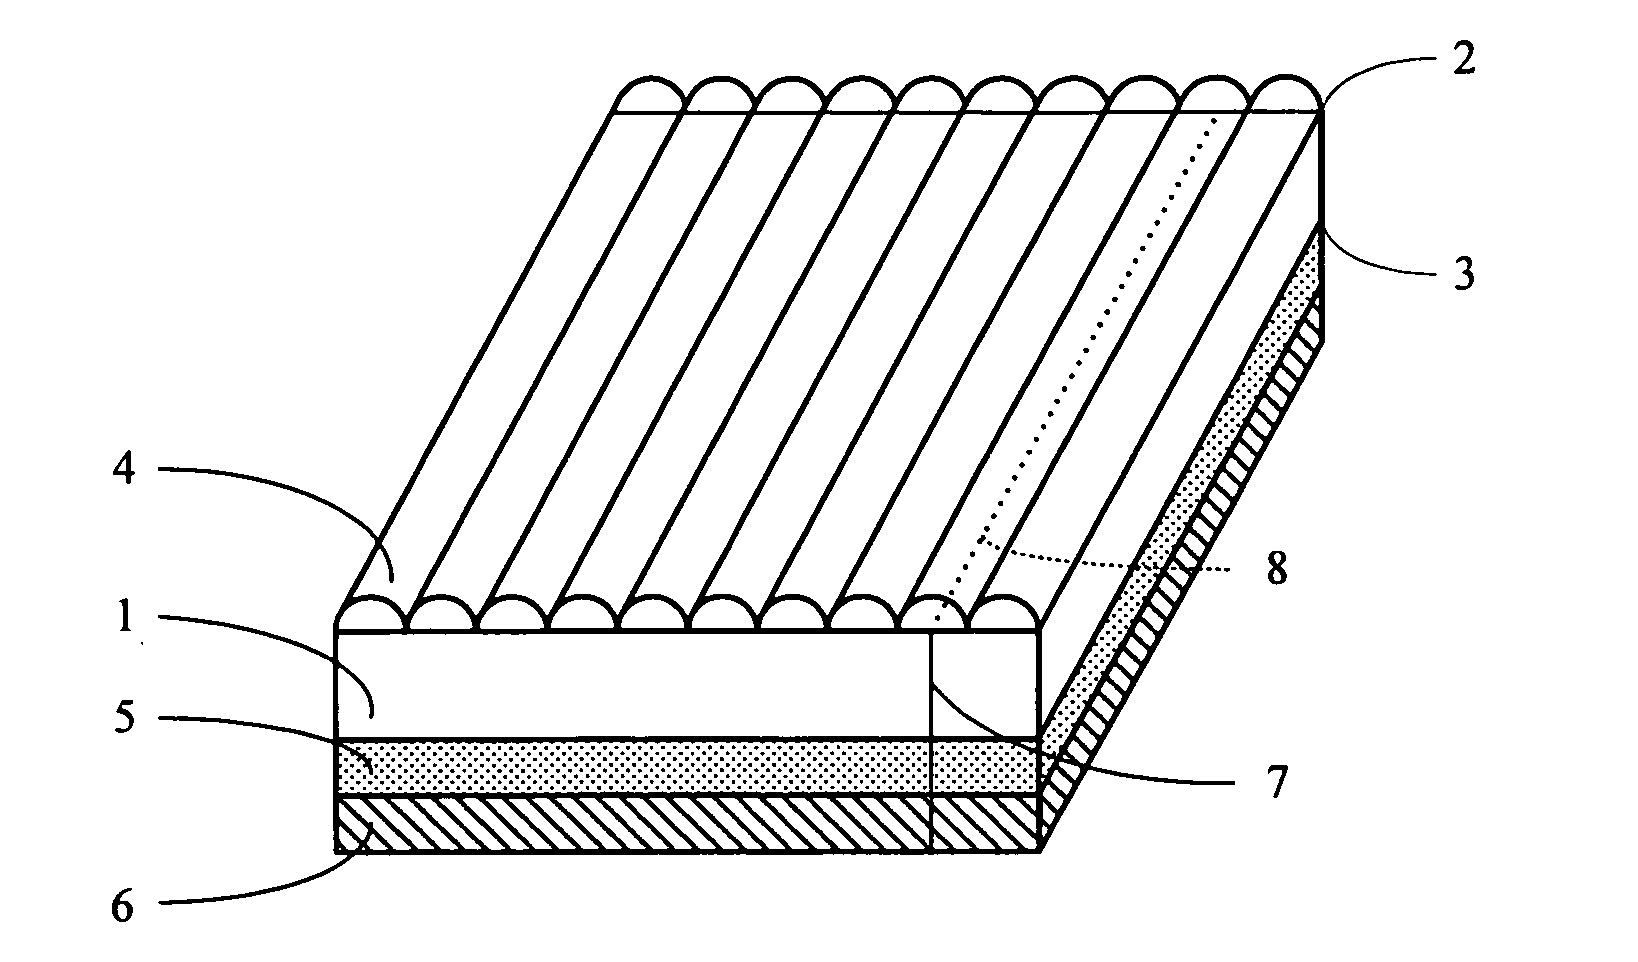 Laminate with optical structure and method for using the same